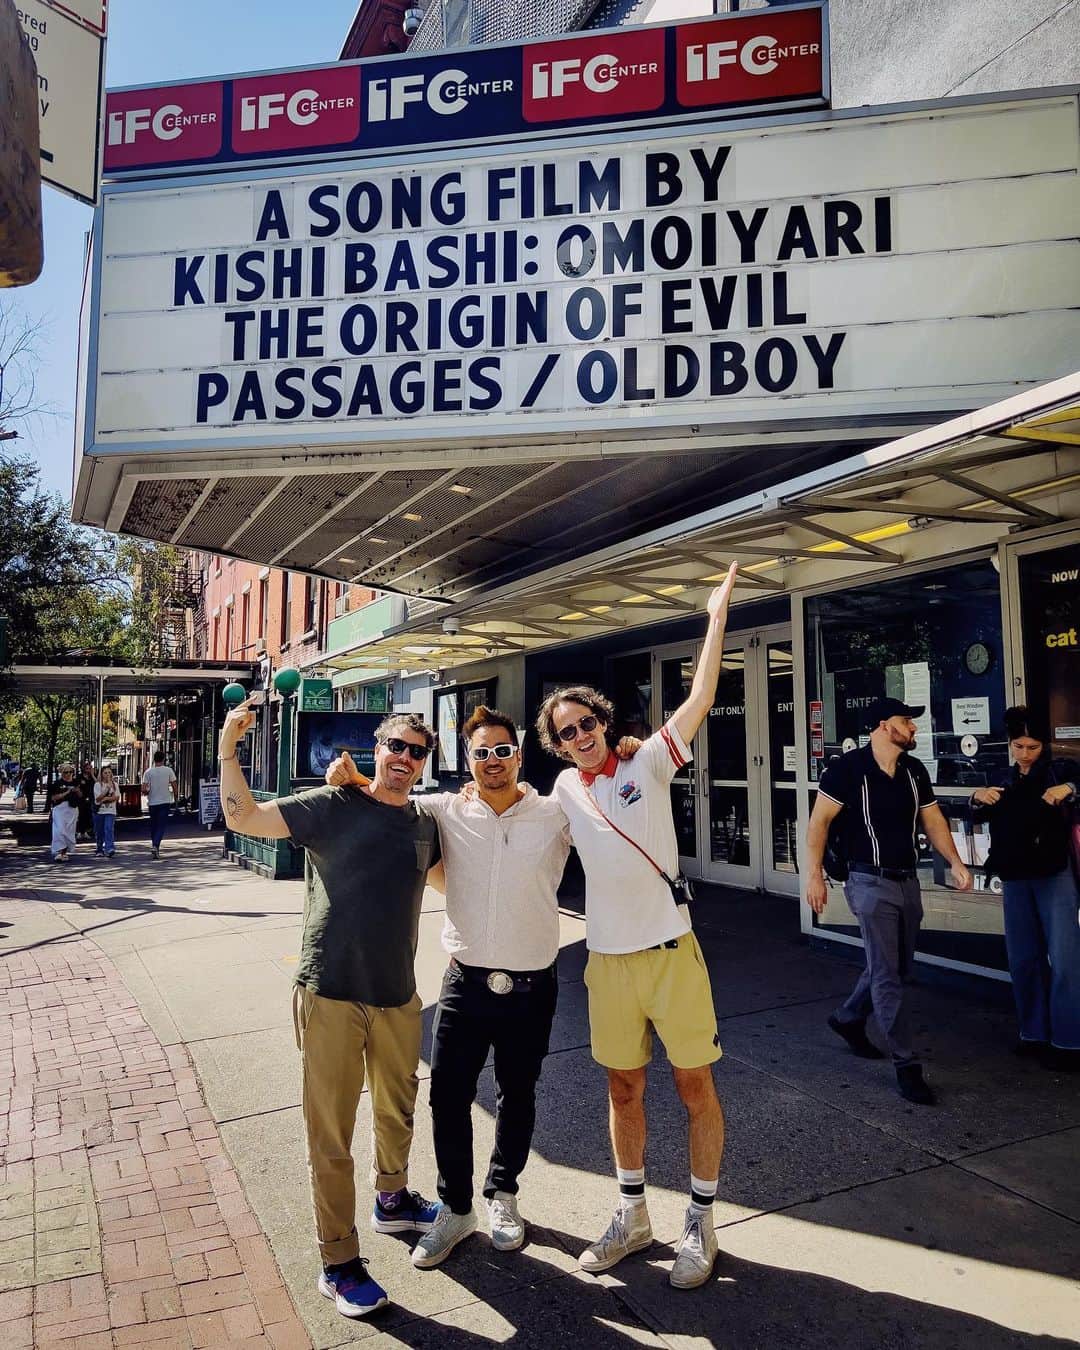 Kishi Bashiのインスタグラム：「Mic check and marquee is up friends! 🎤 NYC TONIGHT @ 7PM @ifccenter  Join us for a special sneak preview screening of OMOIYARI! @omoiyarisongfilm Followed by a Q&A with Directors @kishi_bashi and @jtaylorsmith moderated by none other than @jadabumrad with a special LIVE performance by @kishi_bashi himself!  It’s going to be a night for the history books! Tickets at link in bio! 🎶📽️🍿   Tomorrow we are screening at IFC at 7PM for our official theatrical release!   @thesheilanevins  @jjgerbertv @maxreggieritter @mtvdocs   #omoiyari #kishibashi」